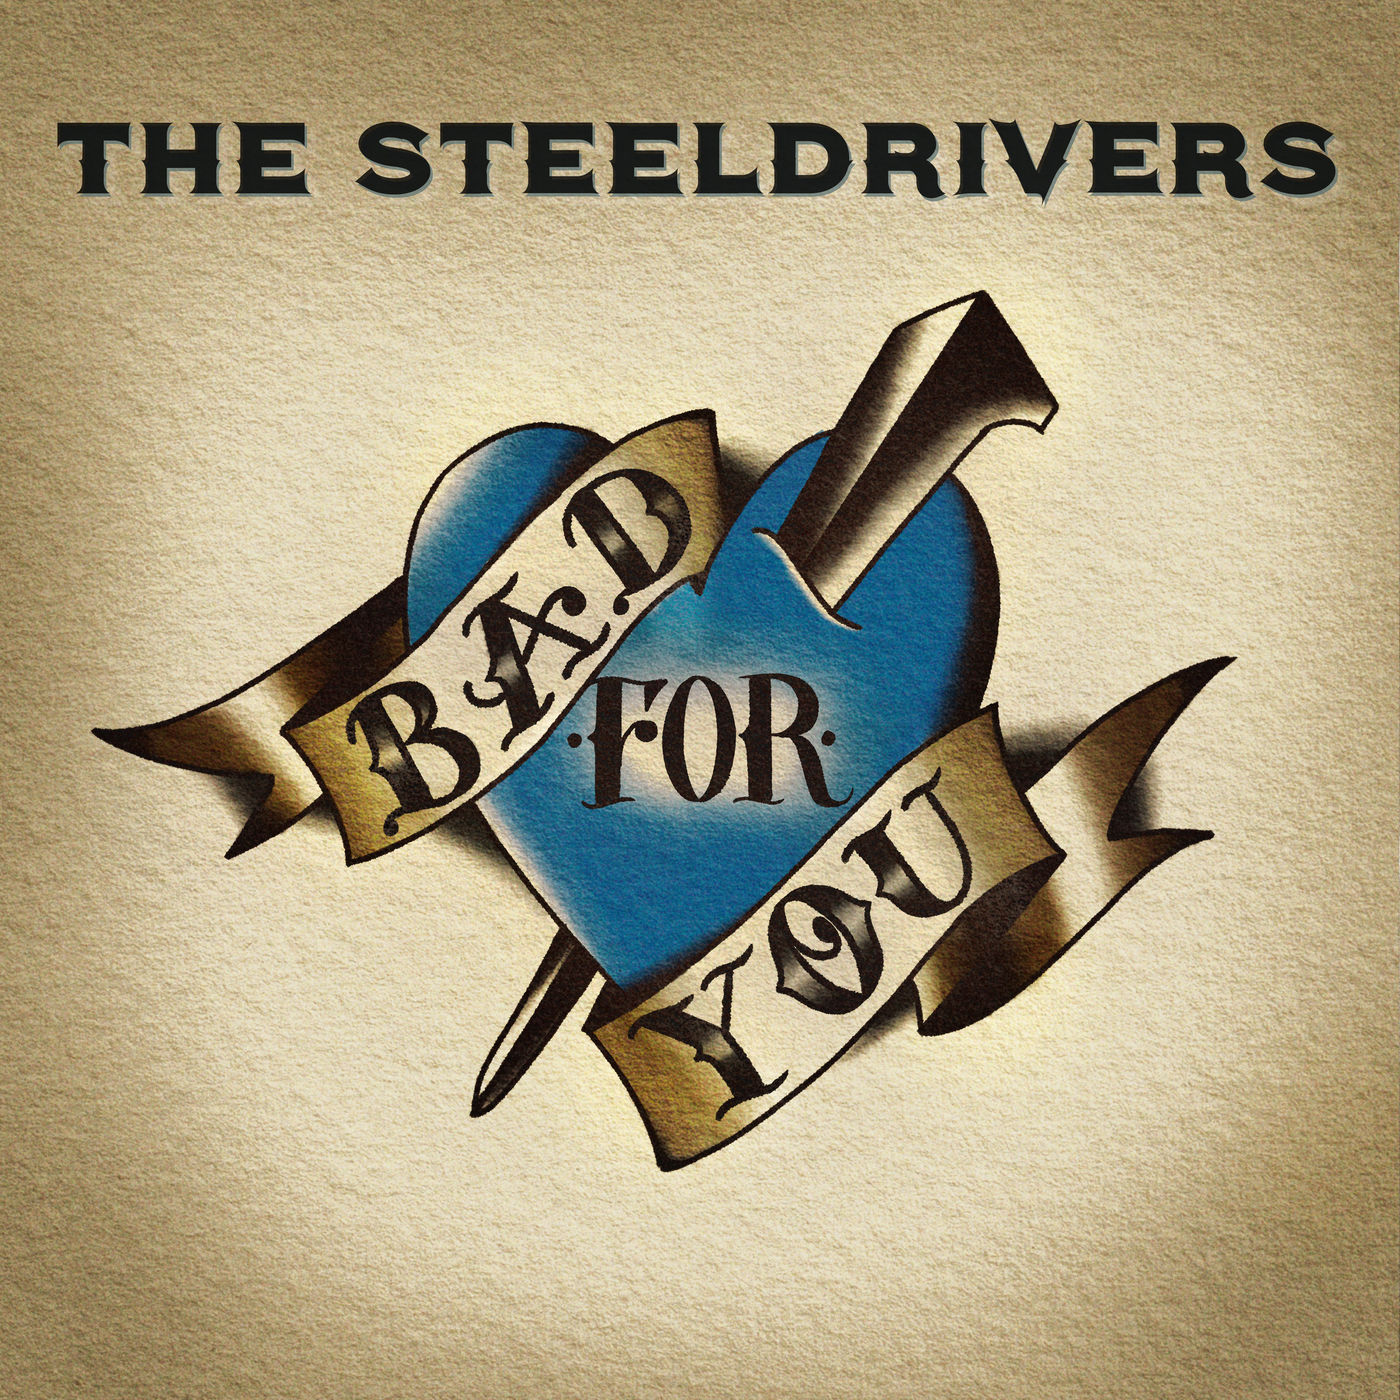 The Steeldrivers - Bad For You (2020) [FLAC 24bit/96kHz]